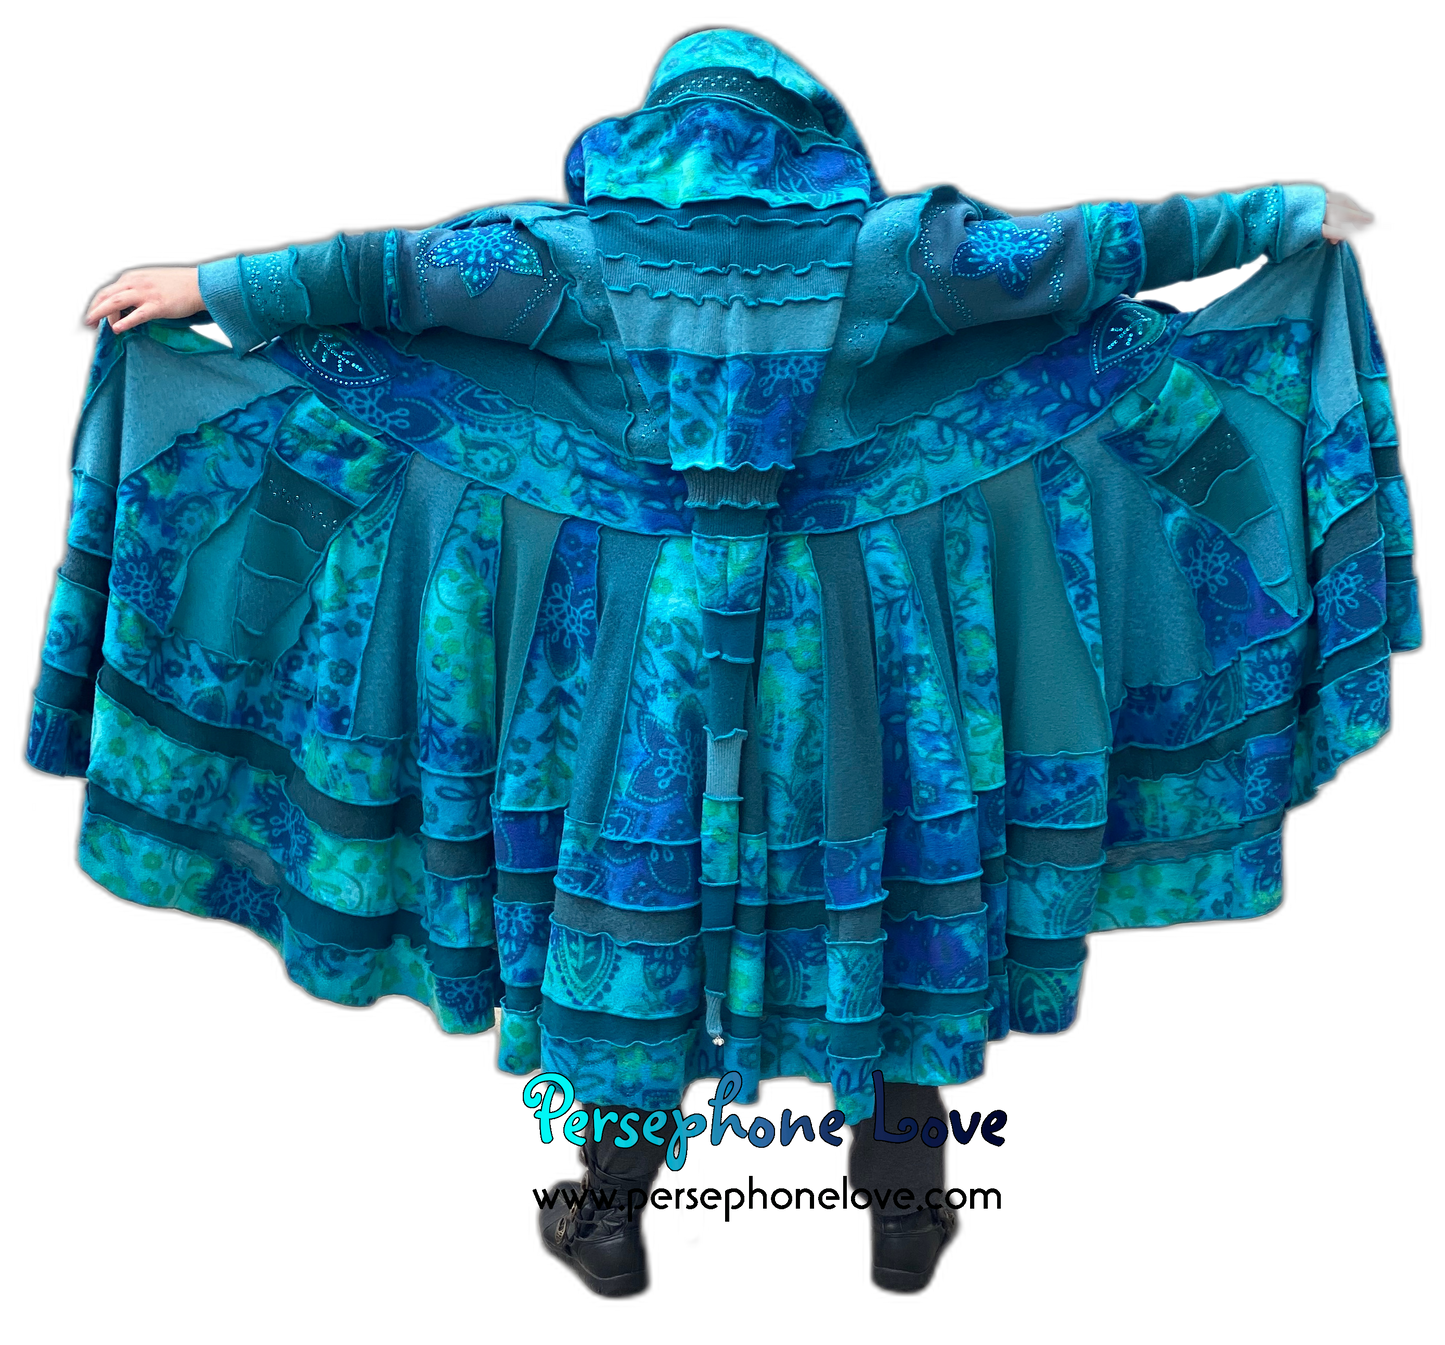 "Dreamdance" GODDESS SIZE Teal floral paisley embroidered/felted/sequins cashmere patchwork Katwise-inspired sweatercoat-2541